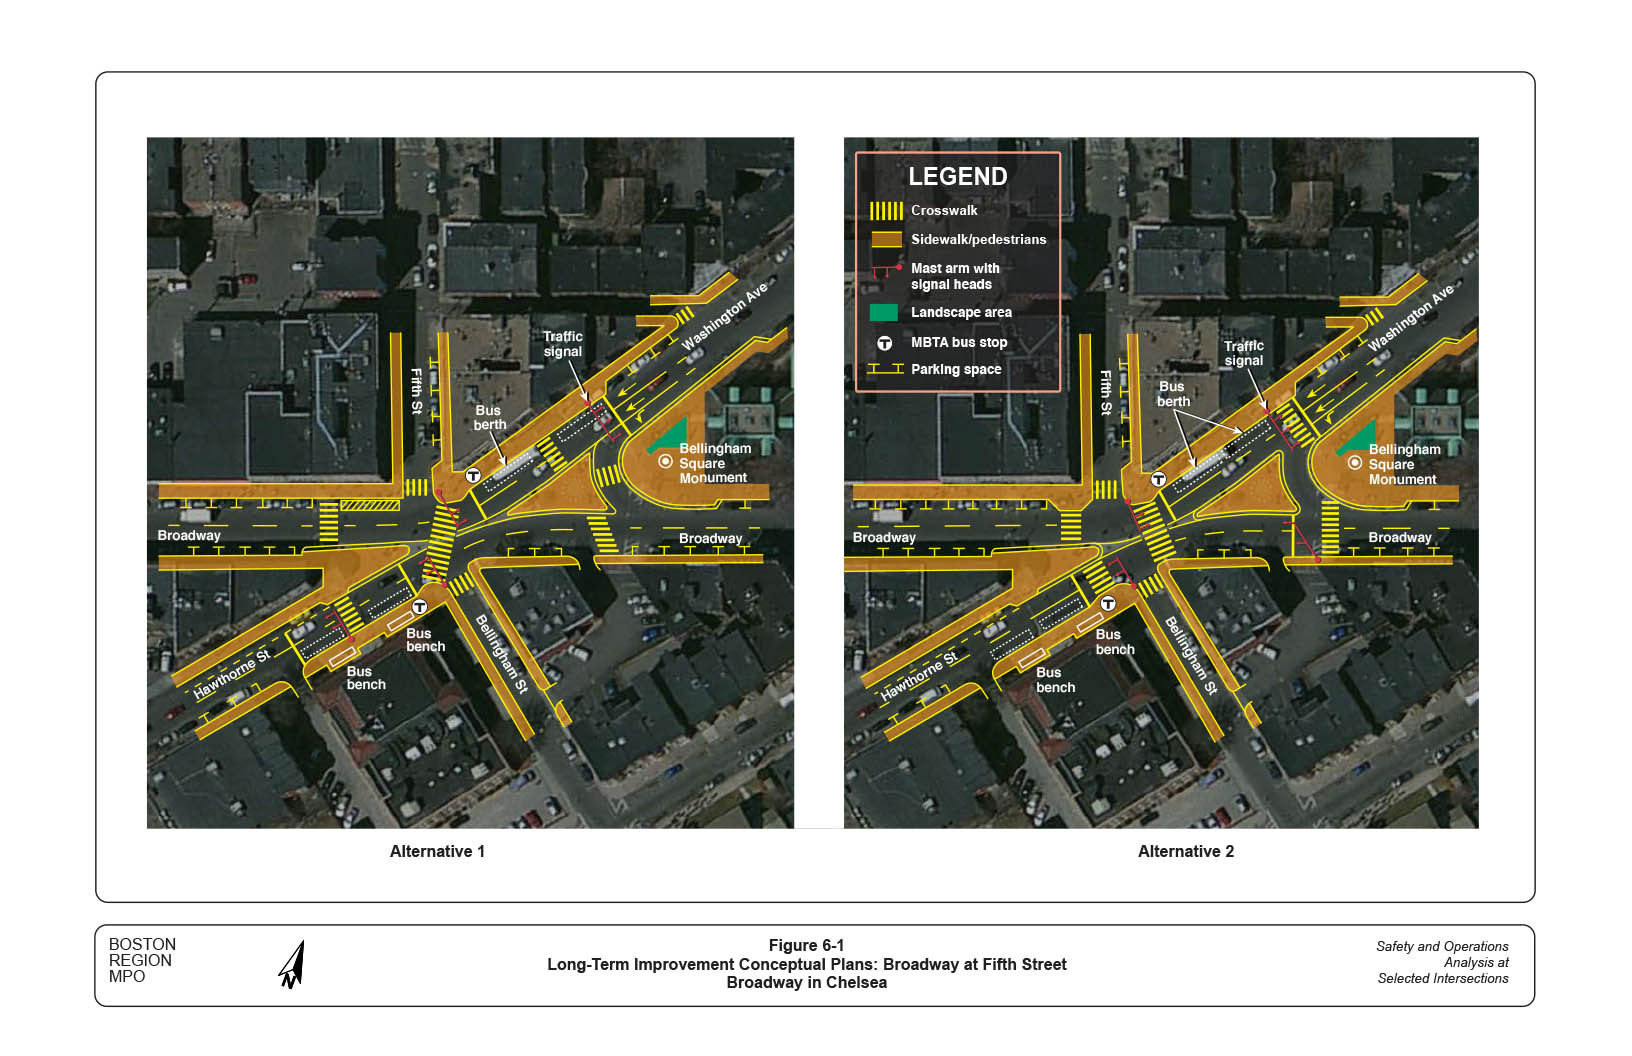 Figure 6-1 — Long-Term Improvement Conceptual Plans: Broadway at Fifth Street
Two separate maps, aerial views of study area with computer-drawn superimposed street and traffic maps, showing improvements under Alternatives 1 and 2, and indicating: crosswalk, mast arm with signal heads, sidewalk/pedestrians, landscape area, MBTA bus stop, and parking space.
